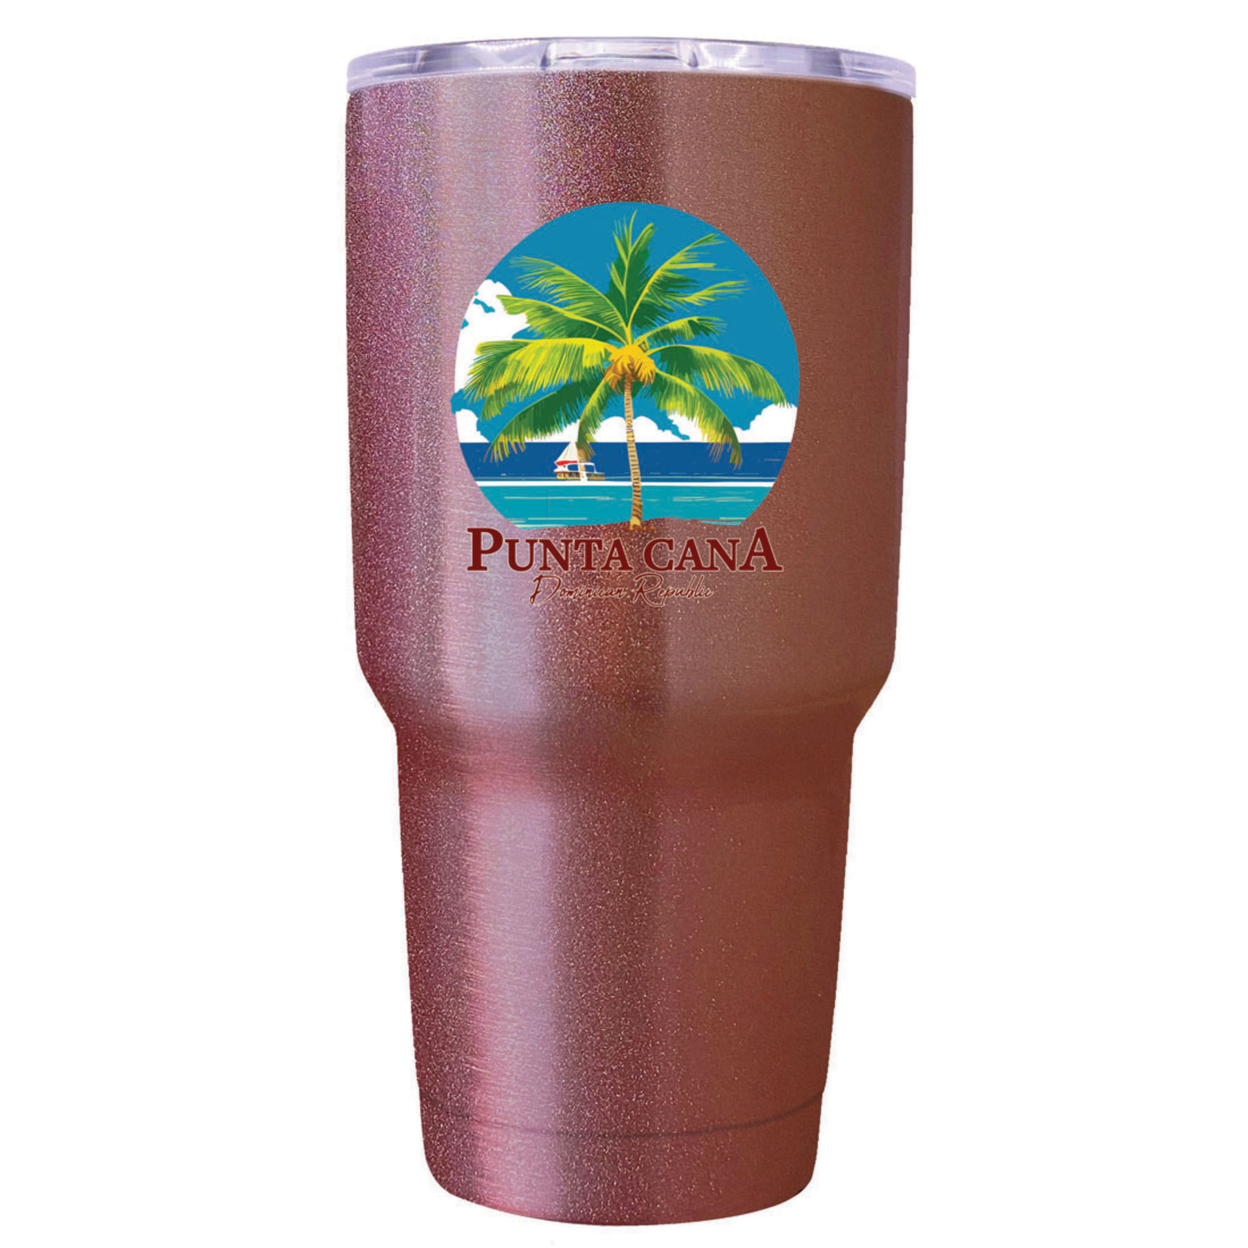 Punta Cana Dominican Republic Souvenir 24 Oz Insulated Stainless Steel Tumbler - Rose Gold, PALM